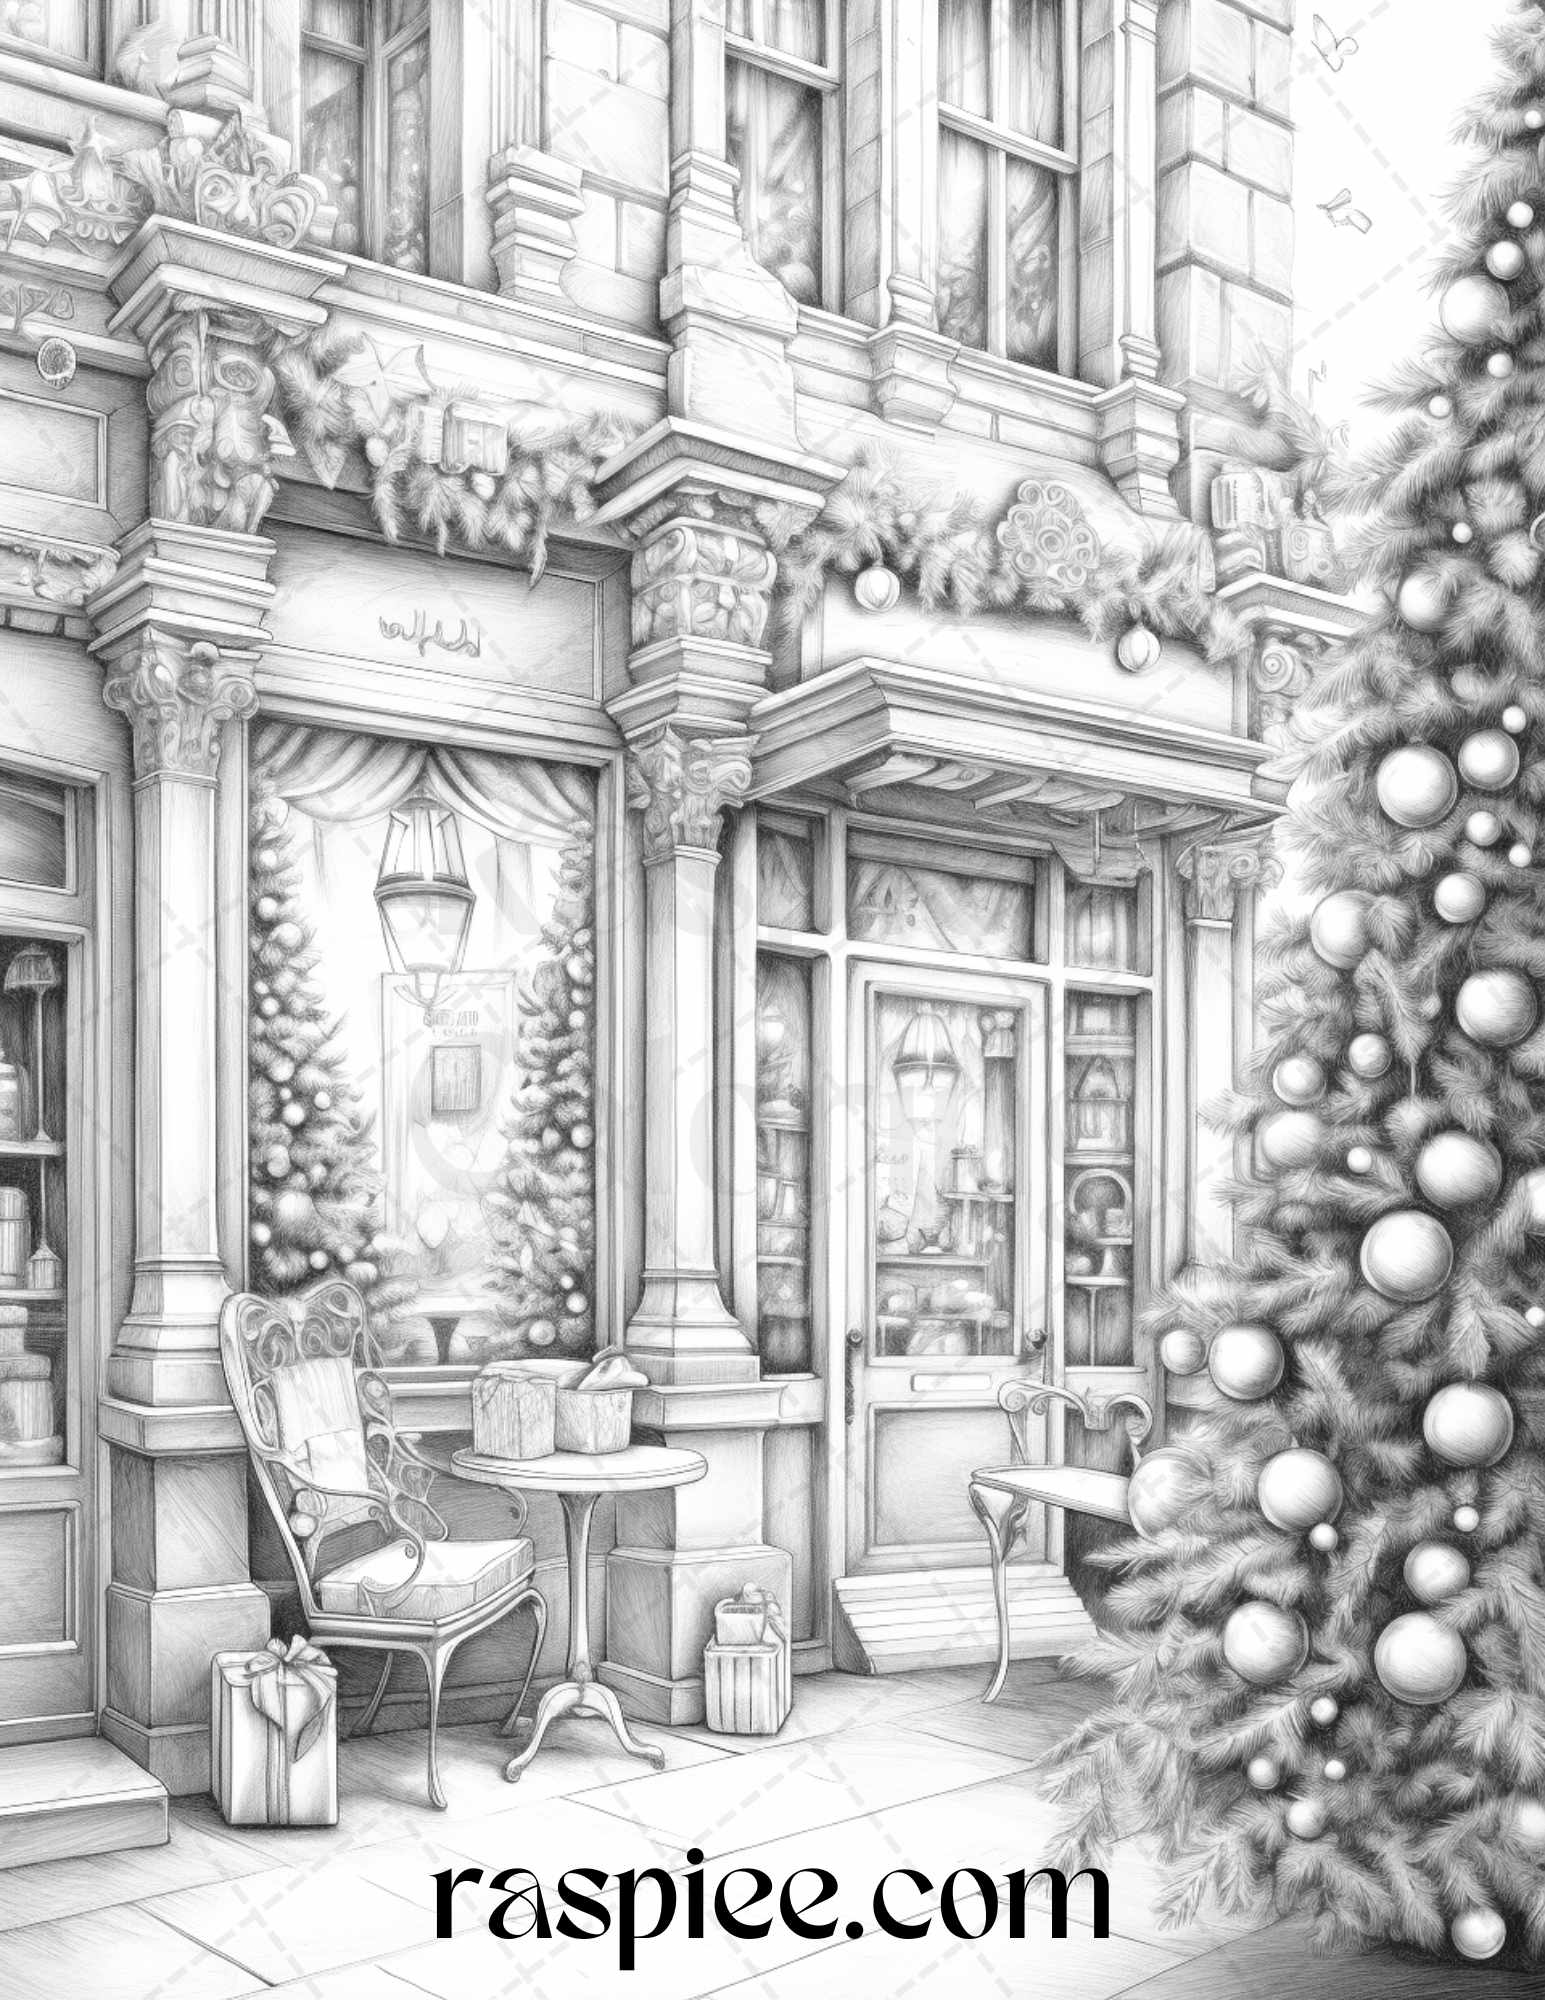 Christmas grayscale coloring page for adults, Adult coloring sheet winter decoration, Detailed winter coloring page instant download, DIY holiday craft coloring activity, Relaxing winter coloring for adults, Printable Christmas decorations to color, Seasonal adult coloring fun download, Festive grayscale holiday coloring design